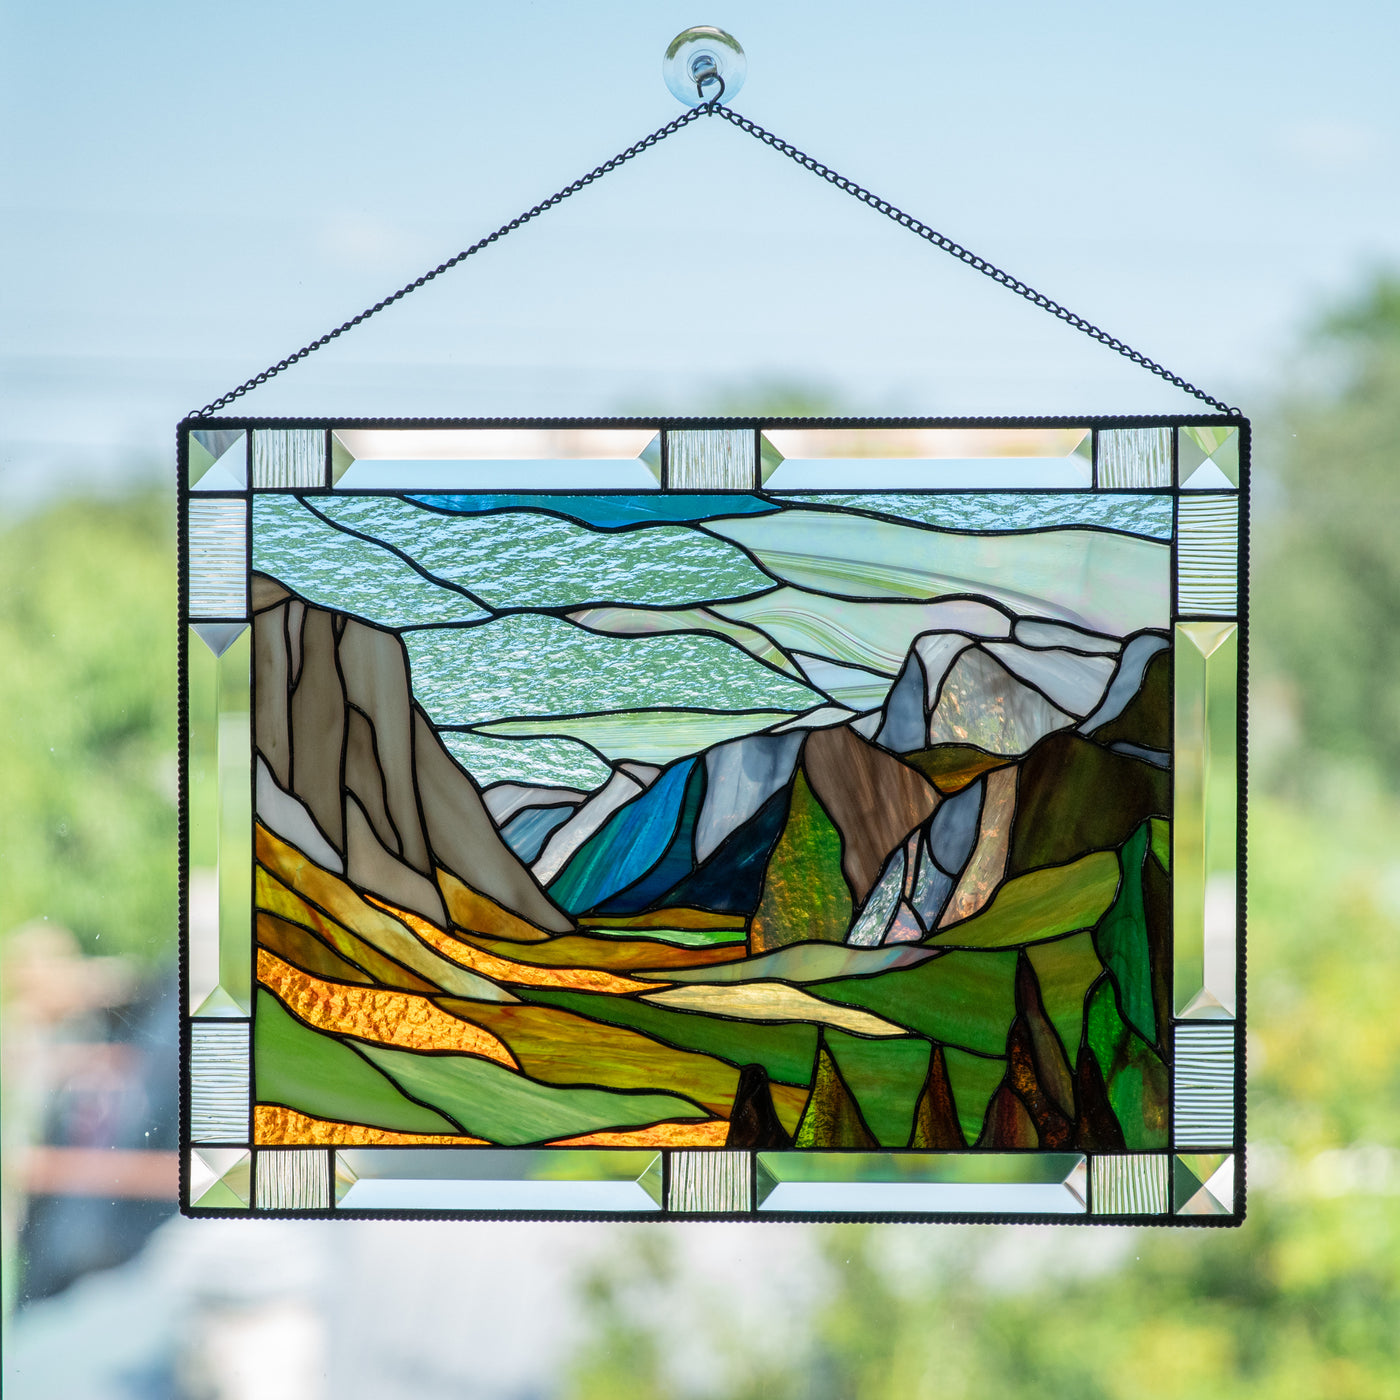 Stained glass panel depicting Yosemite national park for home decor